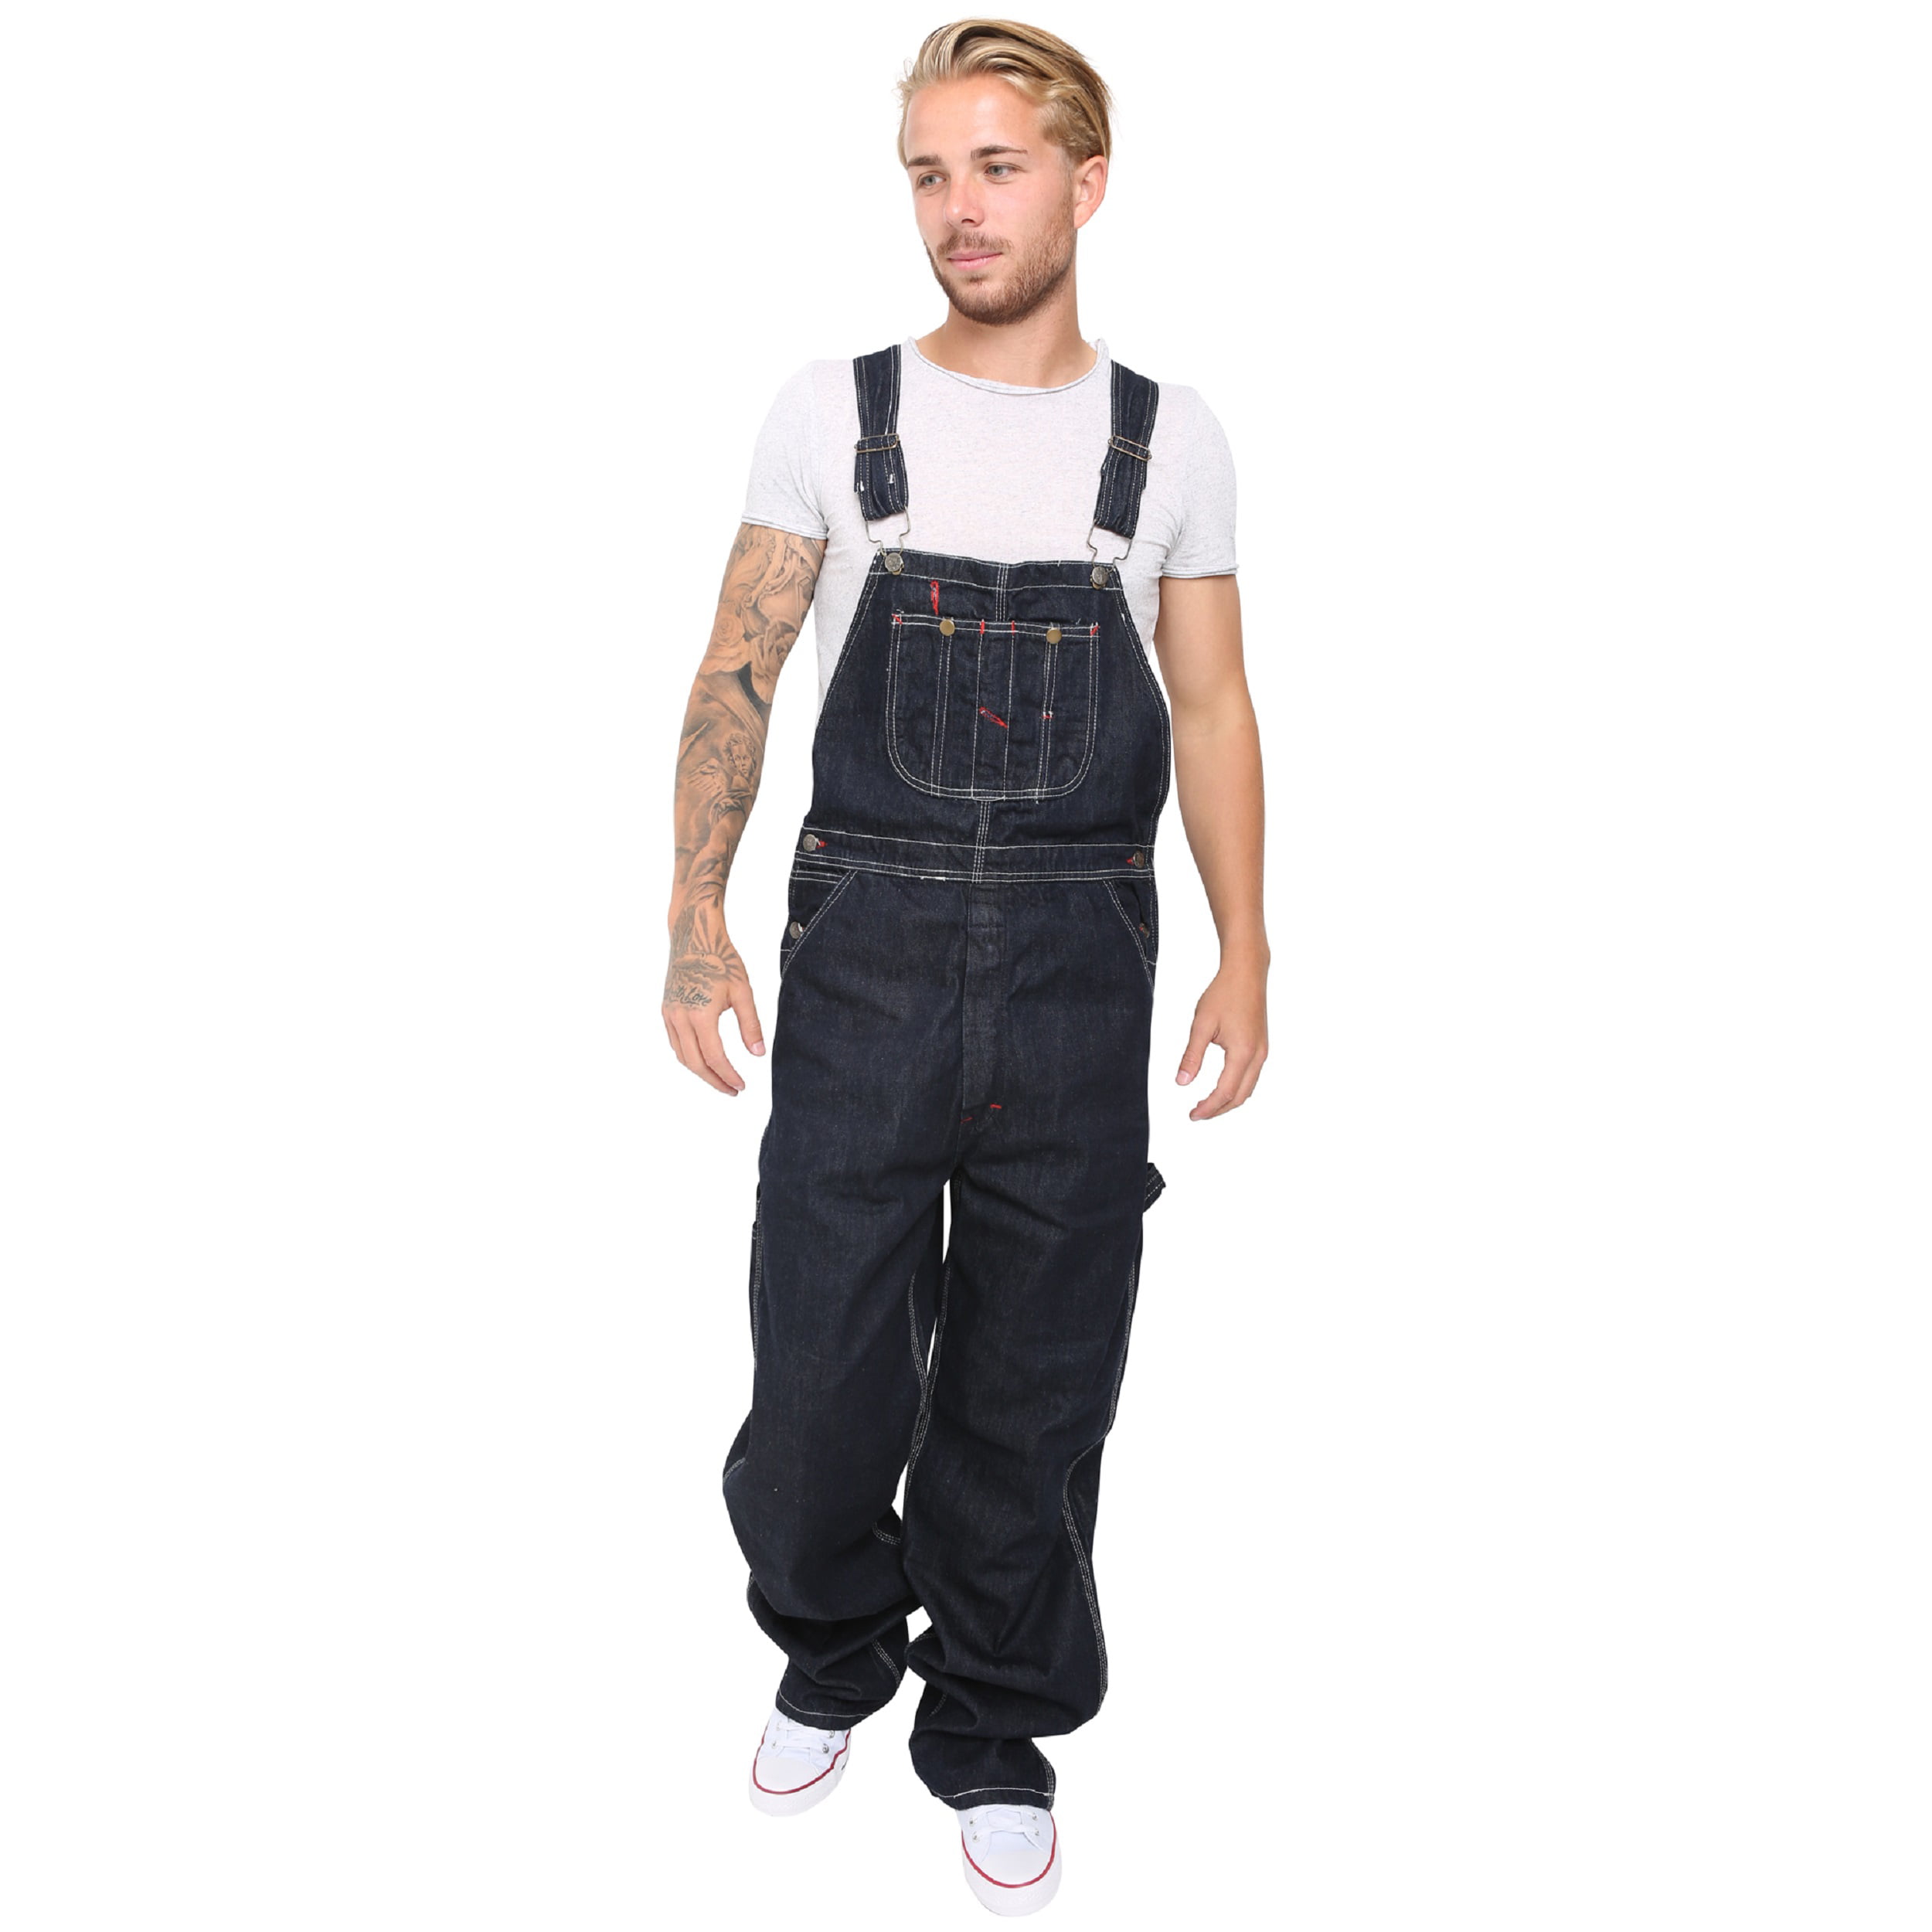 2XL Burnley Workwear Bib and Brace Dungarees Overall Coverall sUw Royal